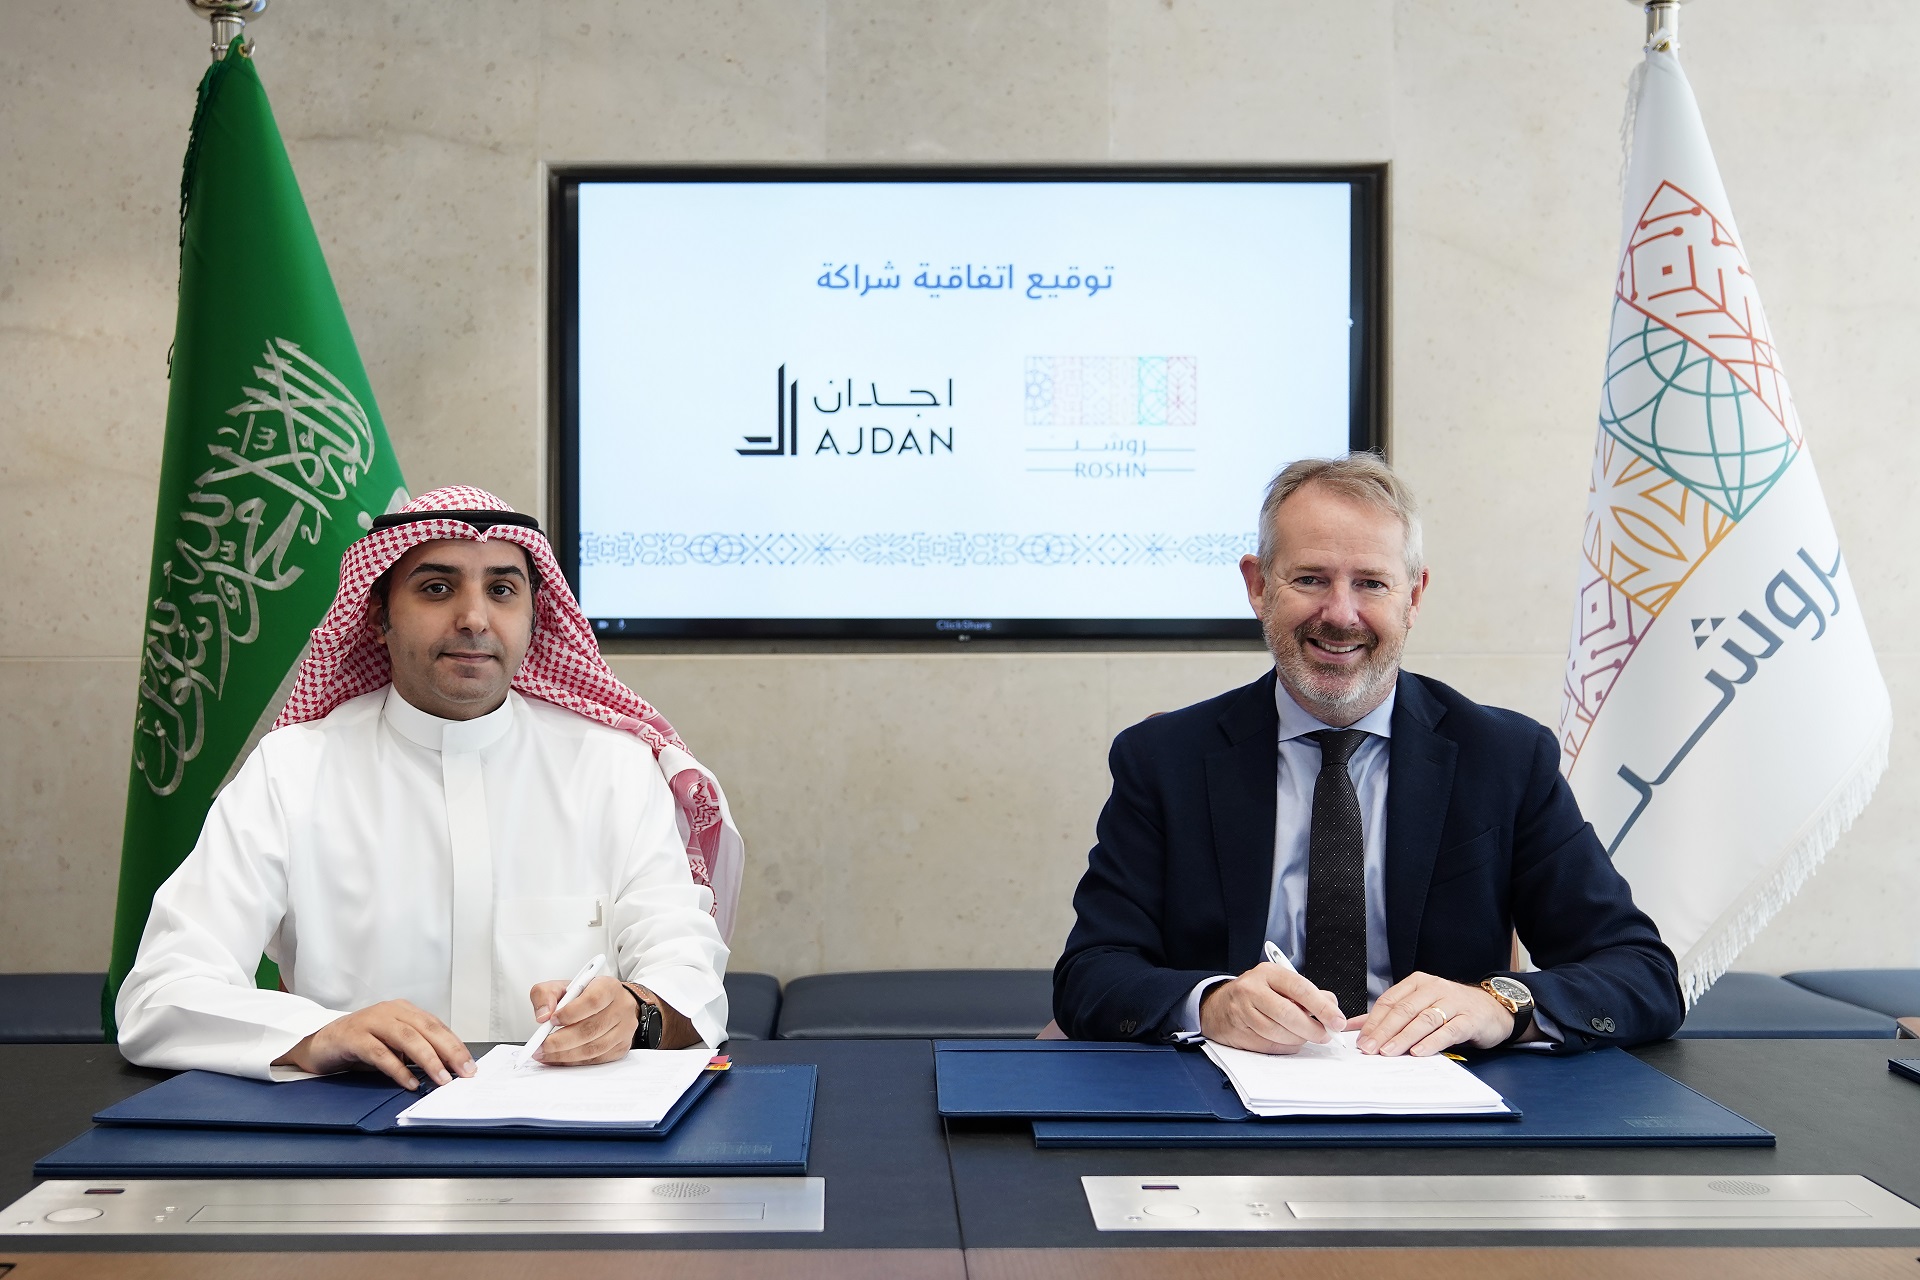 Leading Saudi developer, AJDAN, signed an agreement with PIF backed developer, ROSHN, to develop over 80,000 sqm of residential villas within ROSHN’s SEDRA mixed-use giga project in Riyadh